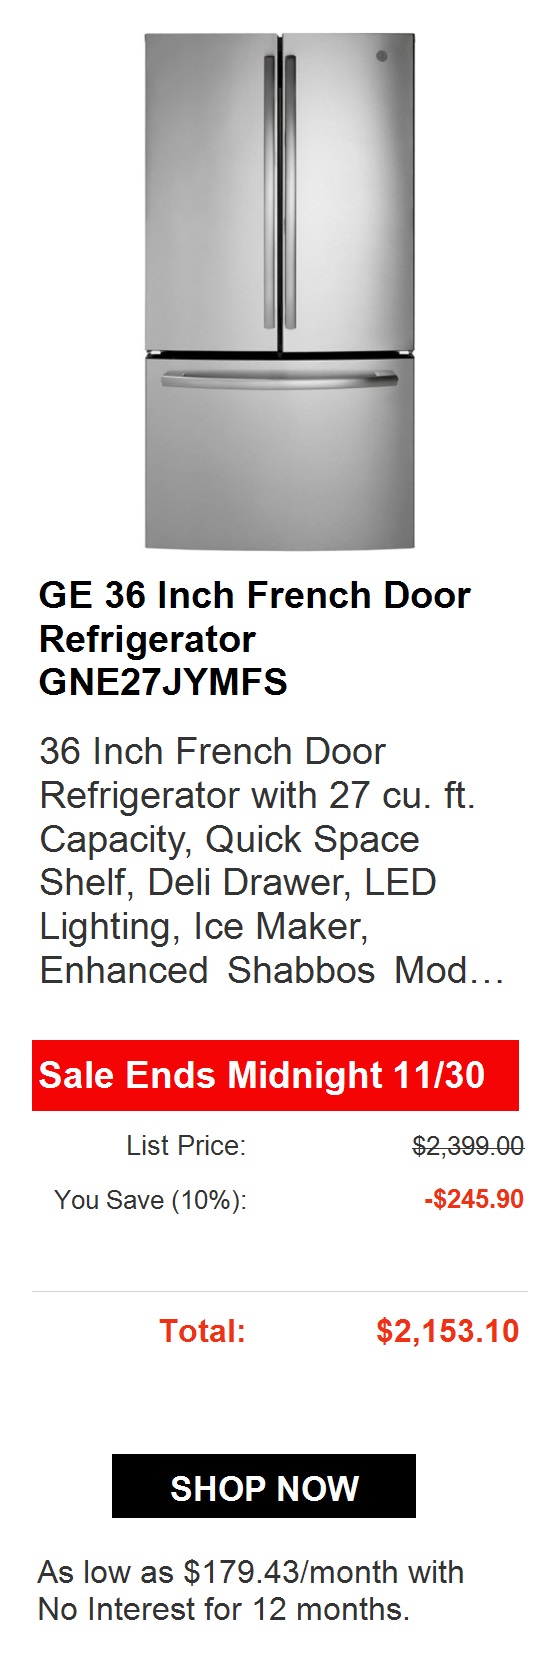 GE 36 French Door Refrigerator GNE27JYMFS 36 Inch French Door Refrigerator with 27 cu. ft. Capacity, Quick Space Shelf, Deli Drawer, LED Lighting, Ice Maker, Enhanced Shabbos Mod... Sale Ends Midnight 1130 List Price: $2,153.00 You Save 26%: -$560.00 Total: $1,593.00 Deal Ends Soon! IN STOCK SHOP NOW As low as $88.50month with No Interest for 18 months. 